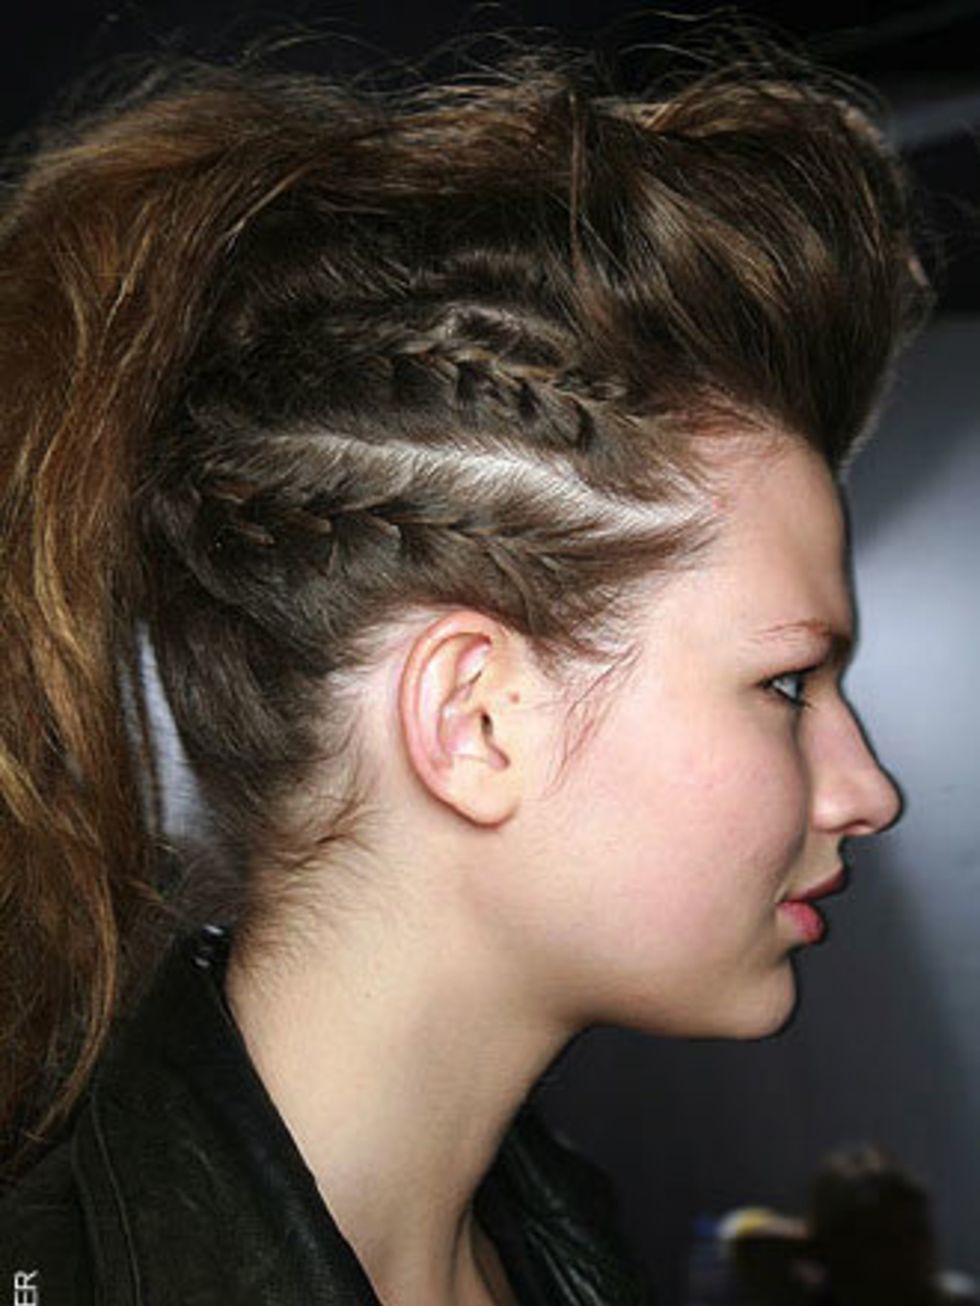 <p><a href="http://www.elleuk.com/beauty/hair/hair-trends/%28section%29/Plaits">Plaits</a> are an easy way to instantly update your hair for winter. Small braids (at the front or sides) will add edge to your look and nod to the 1990s <a href="http://www.e